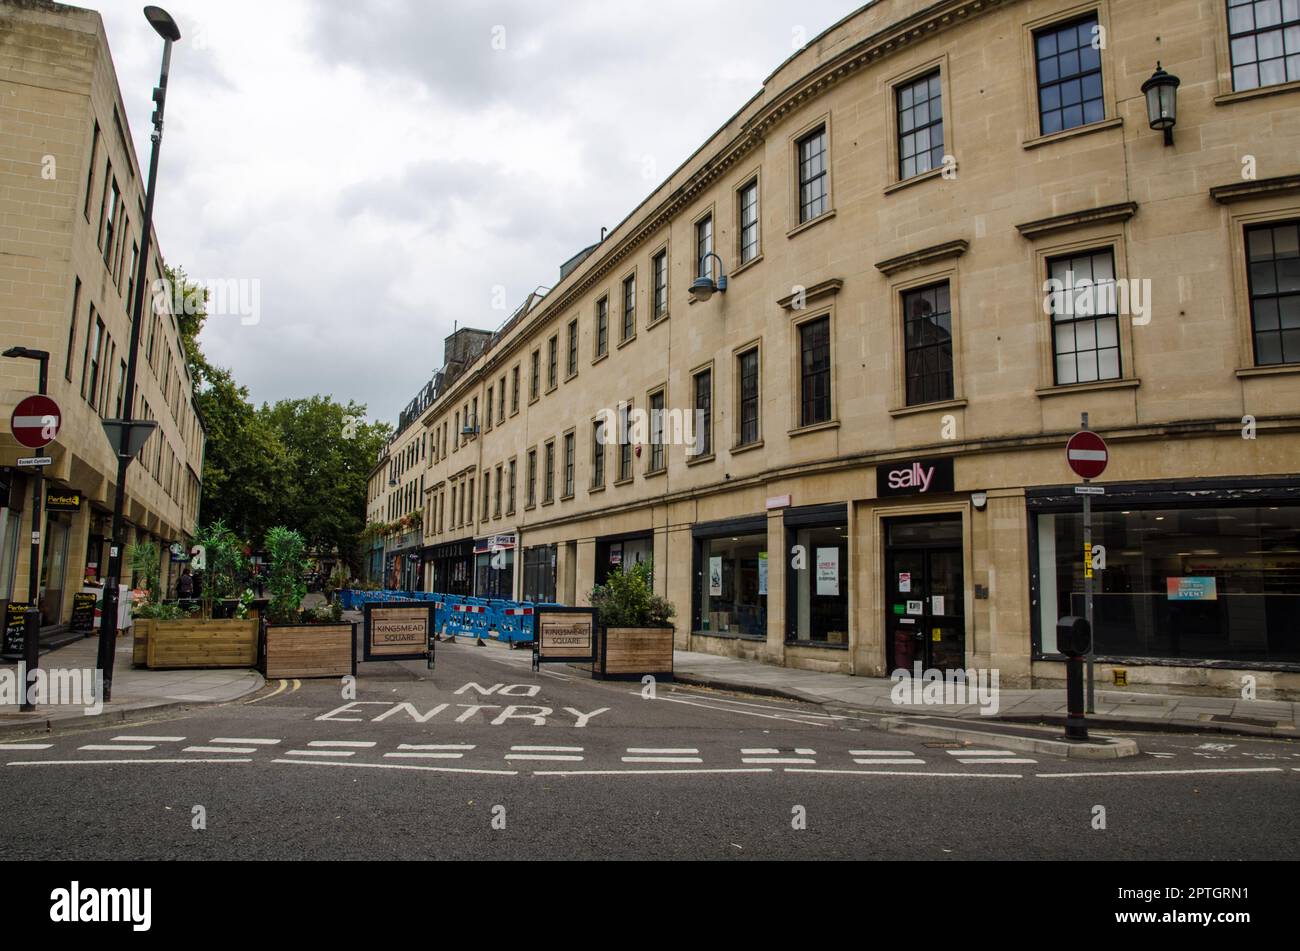 Bath, UK - September 3, 2022: View along Kingsmead Square with shops and cafes in Bath, Somerset on a cloudy autumn afternoon. Stock Photo